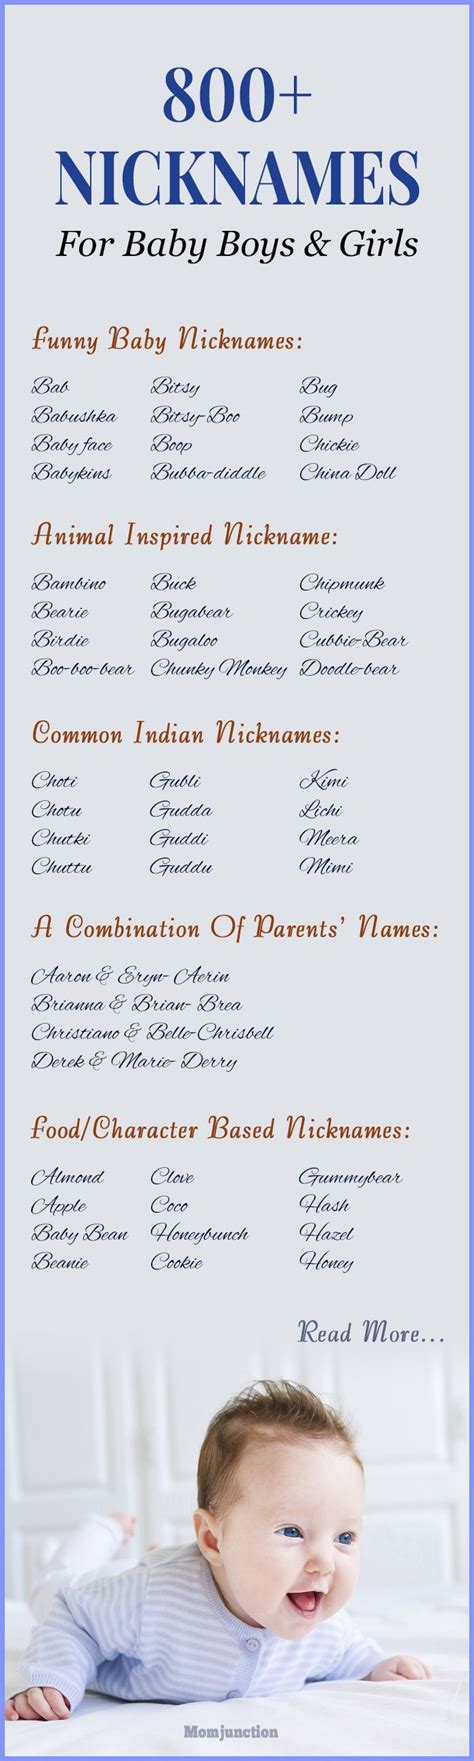 800 Cute Baby Nicknames Or Pet Names For Boys And Girls Baby